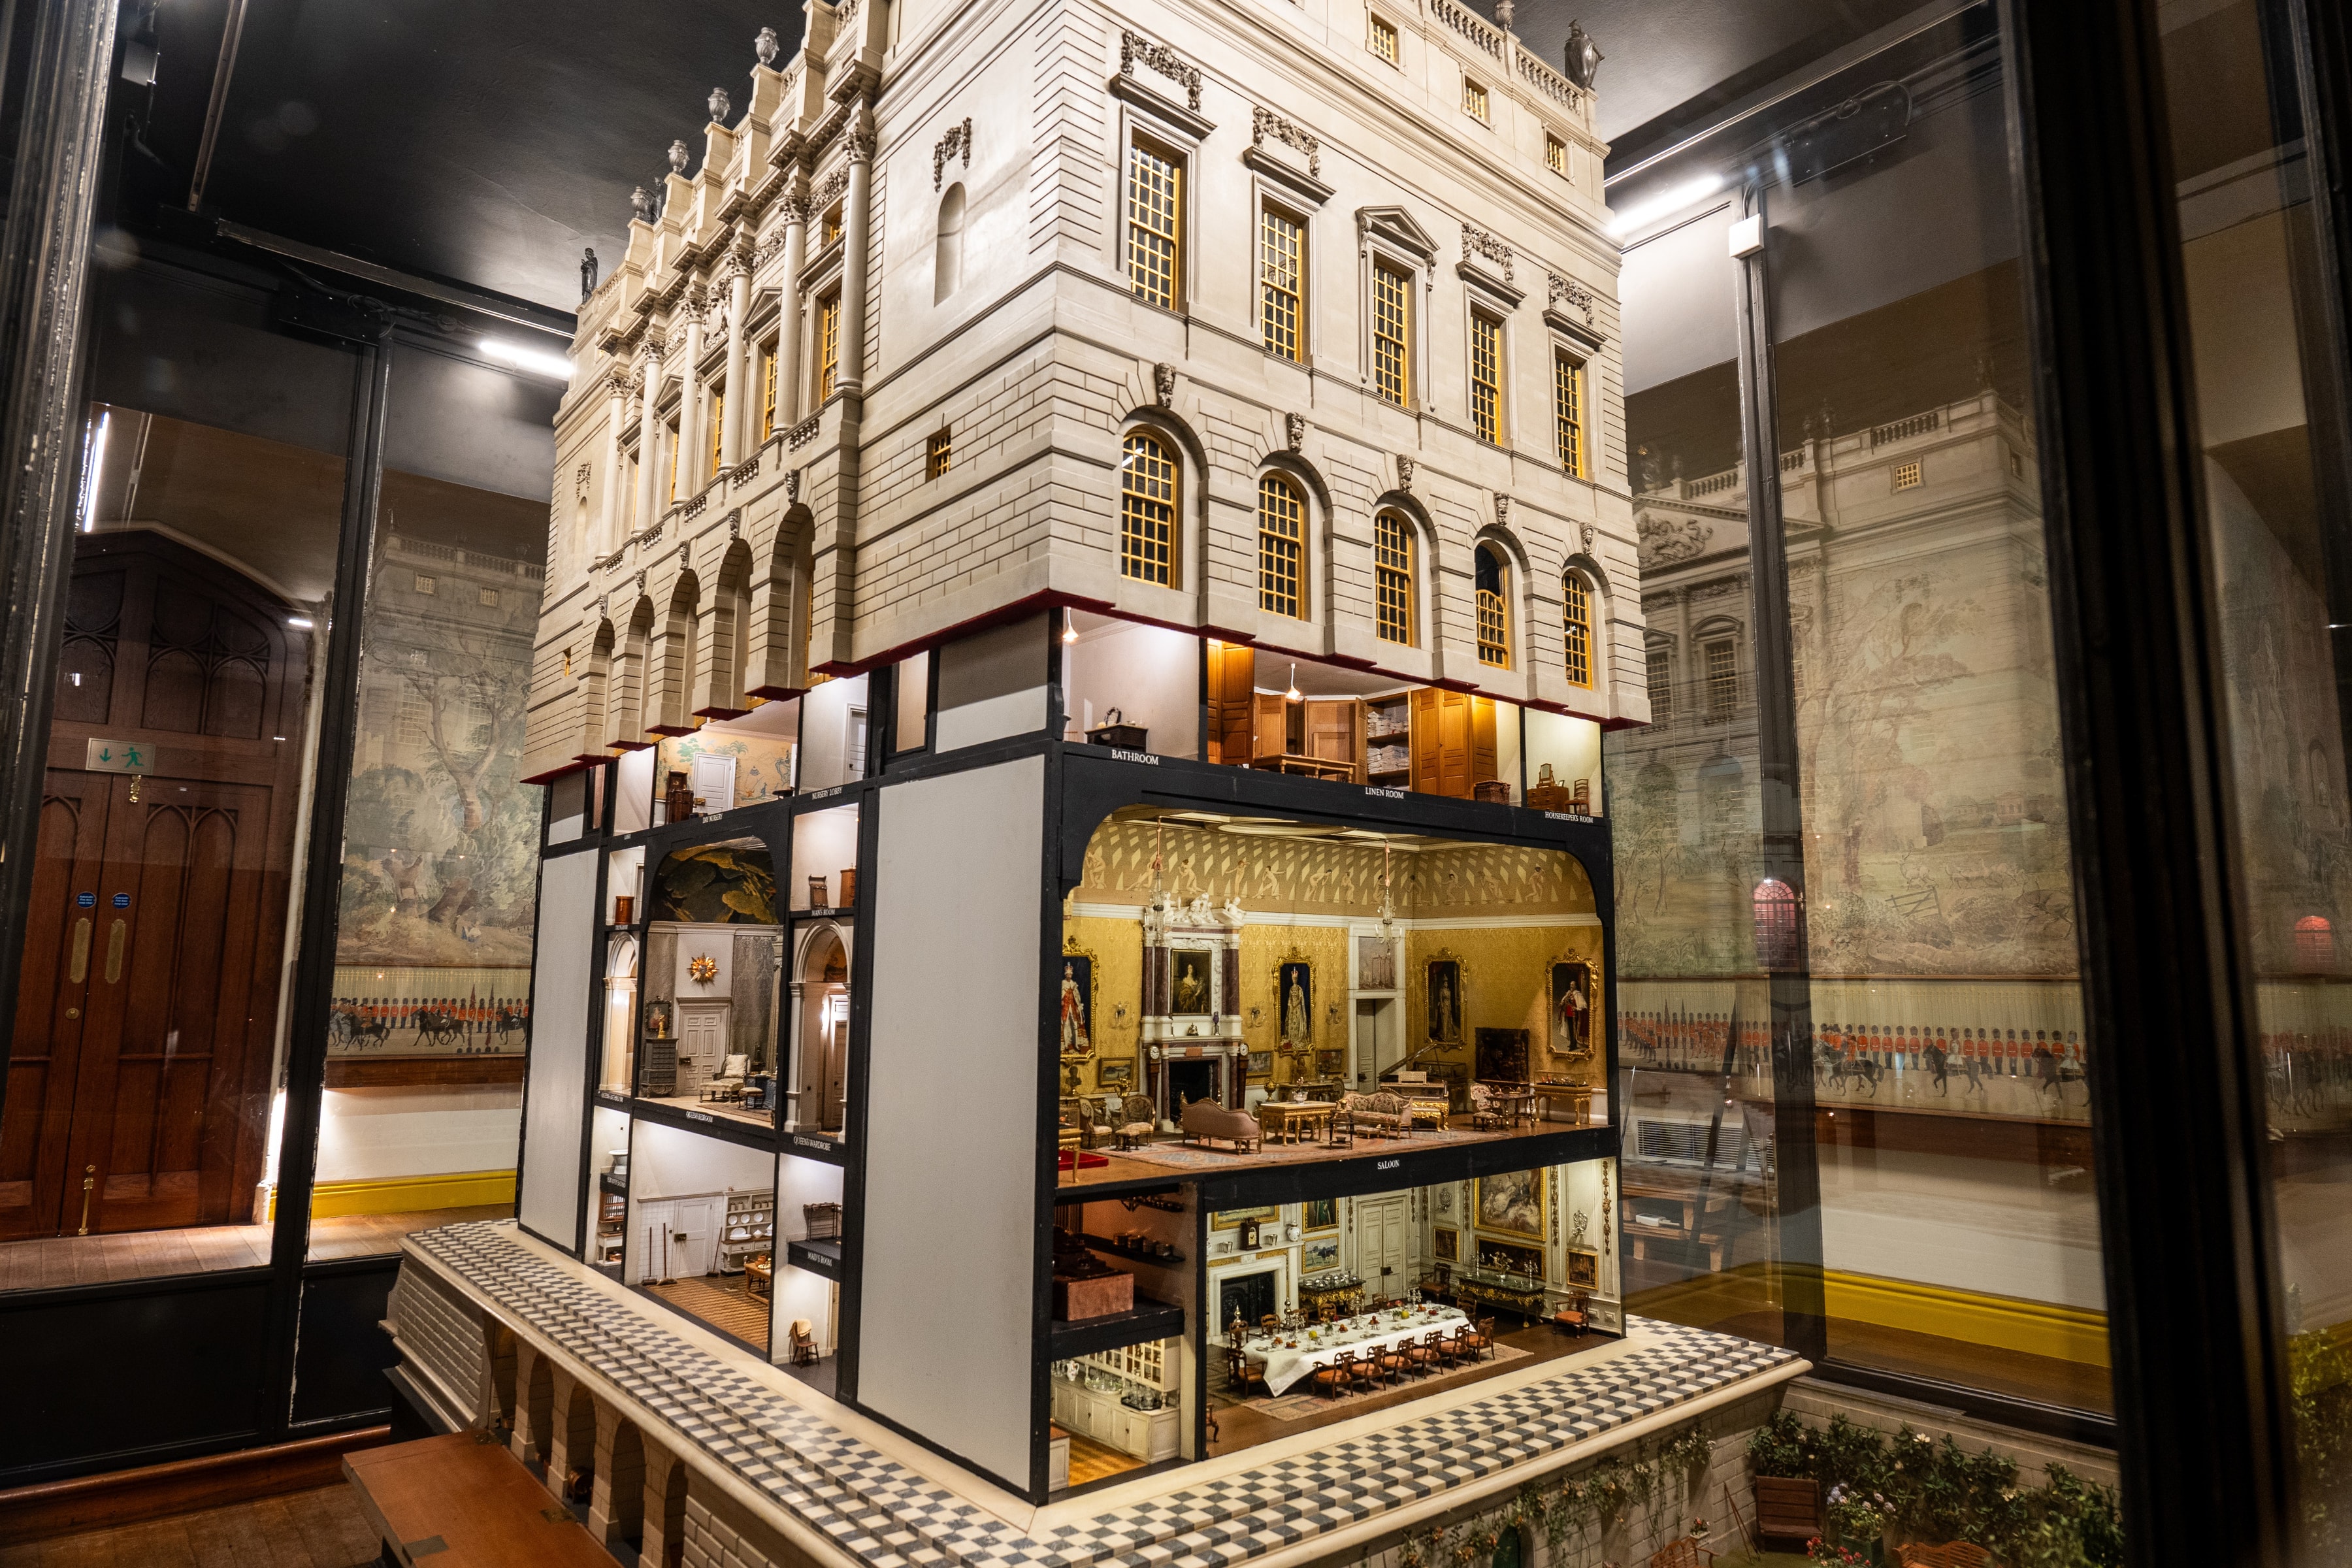 Queen Mary’s doll house display at Windsor